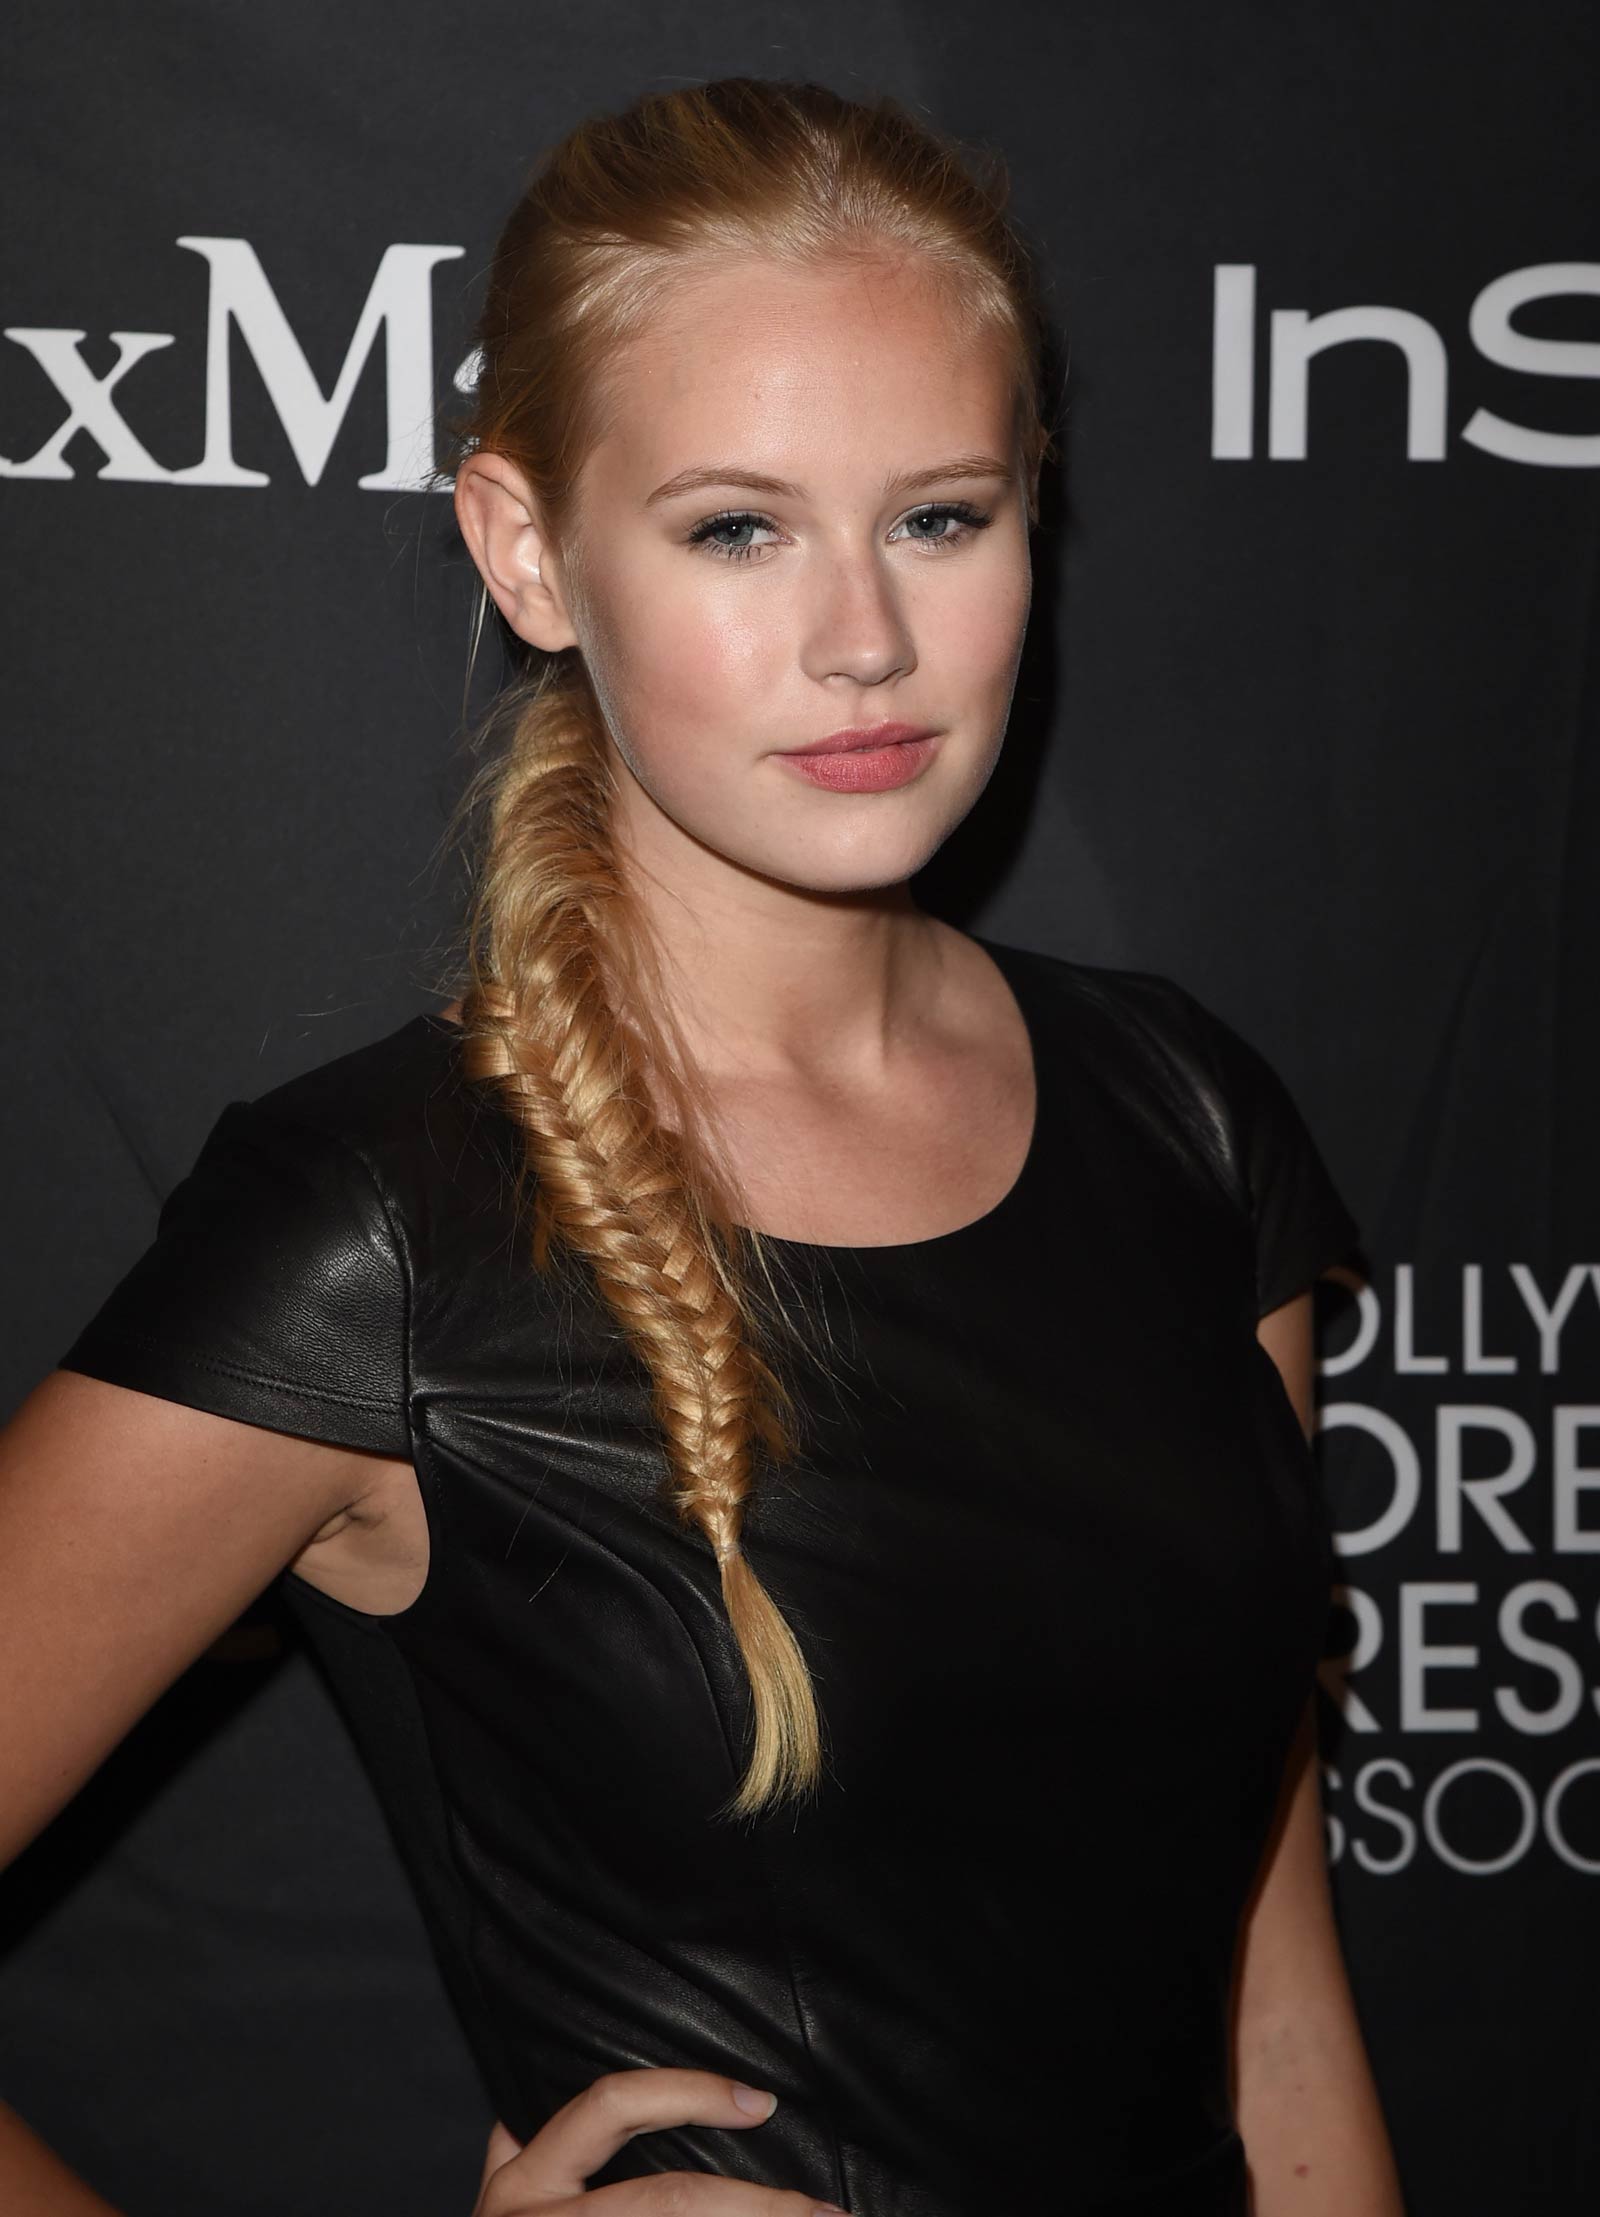 Danika Yarosh attends InStyle & HFPA party